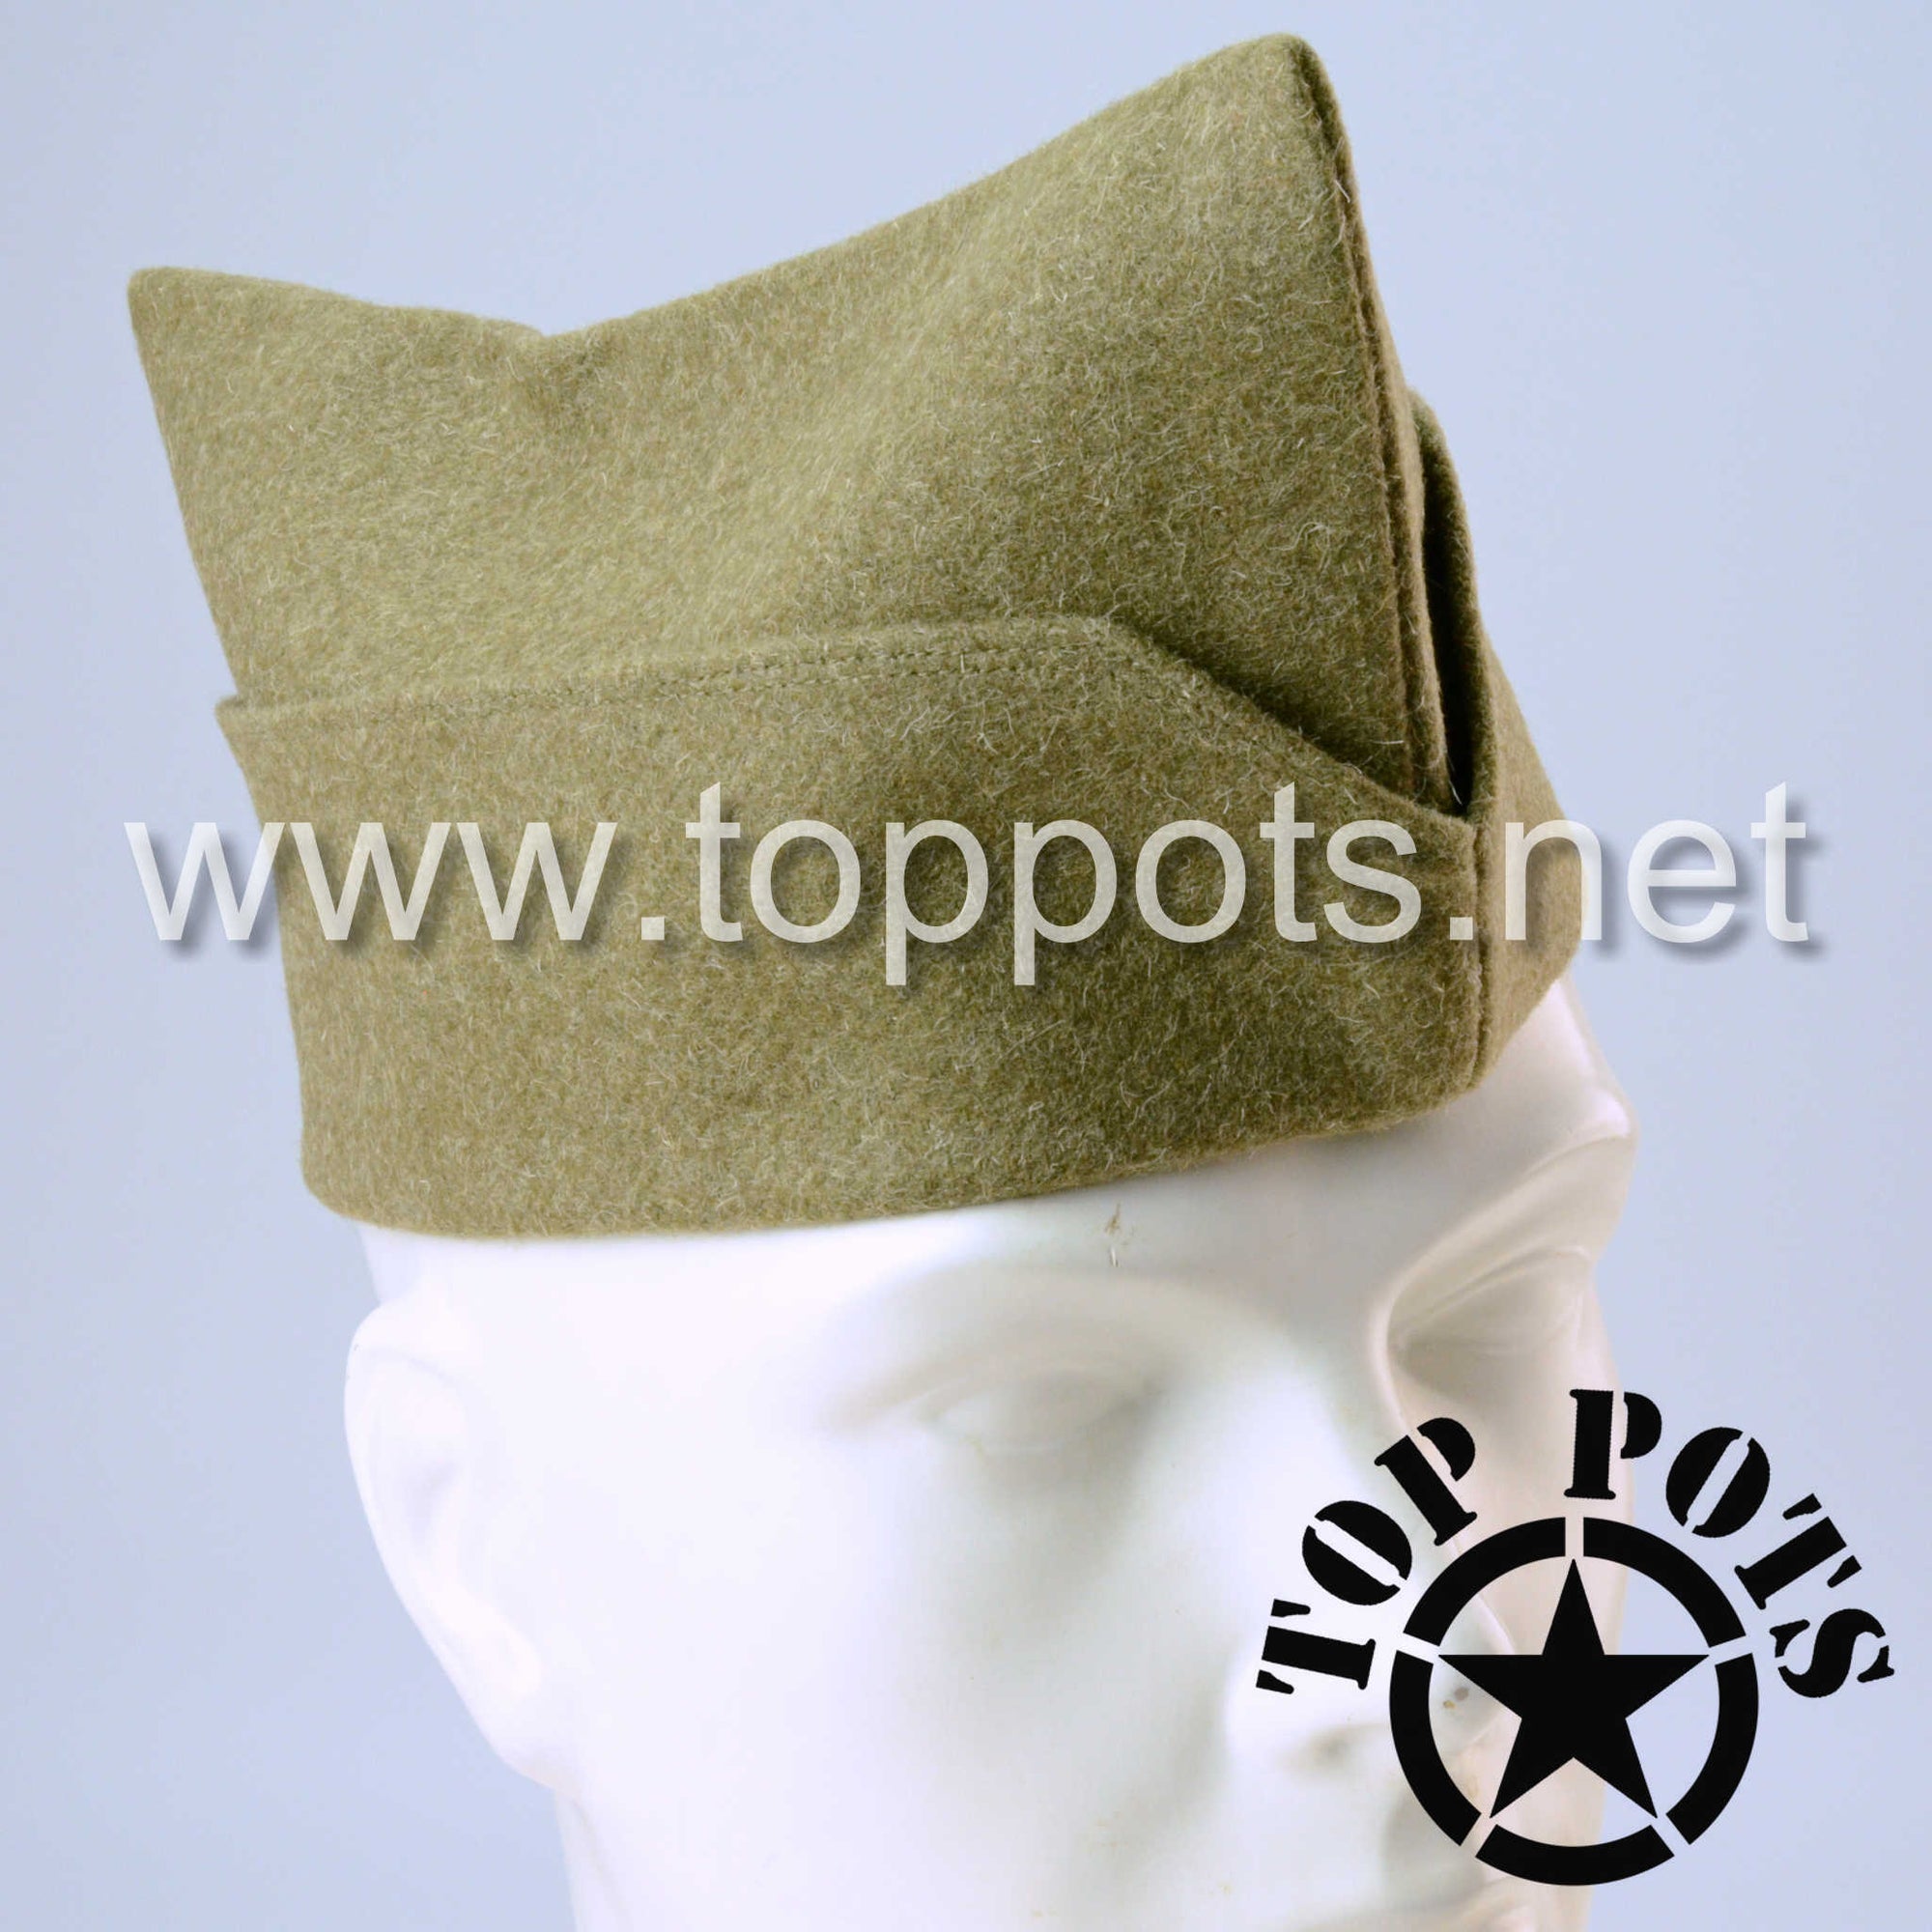 WWI US Army Reproduction American Doughboy Wool Enlisted Uniform Overseas Side Cap – French Cut